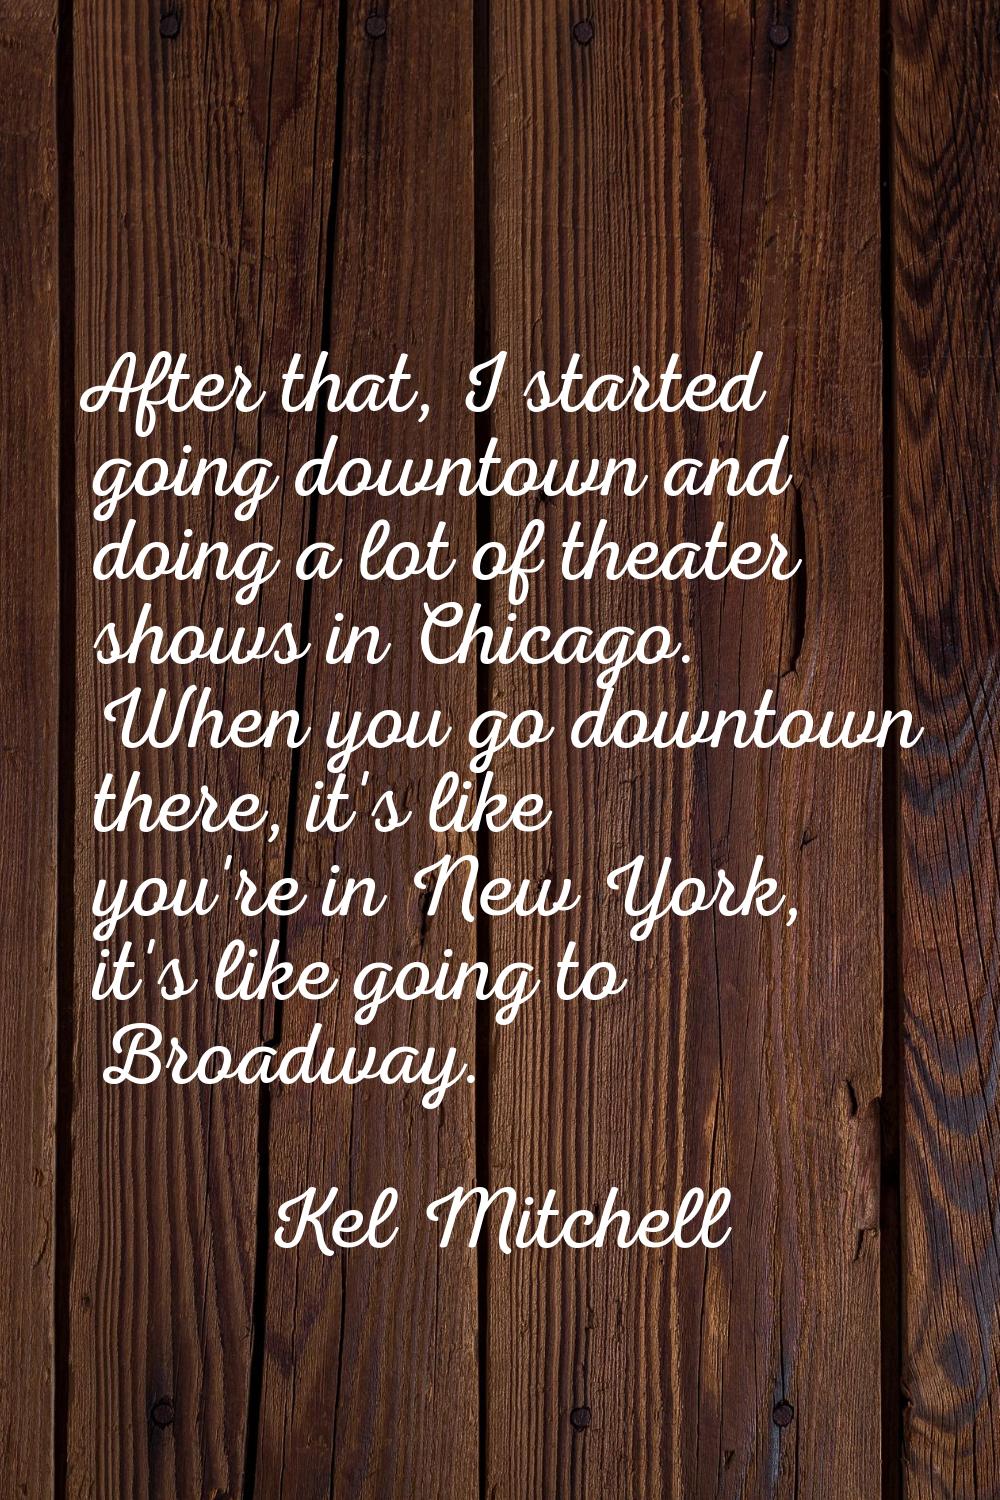 After that, I started going downtown and doing a lot of theater shows in Chicago. When you go downt